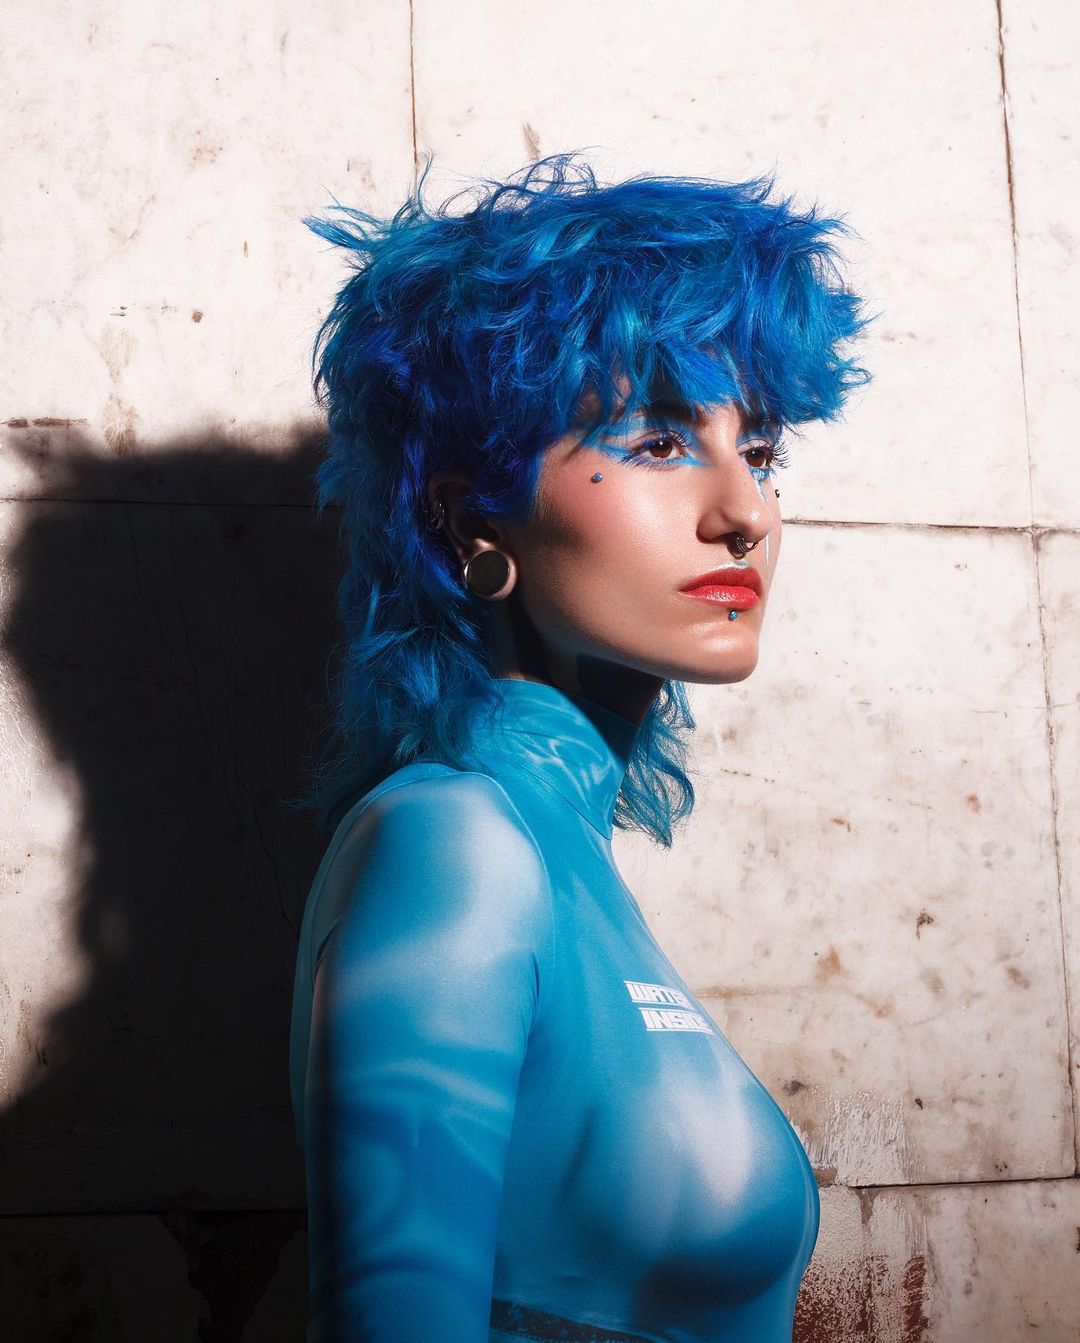 Blue hair: 40 ideas that will emphasize individuality and sense of style